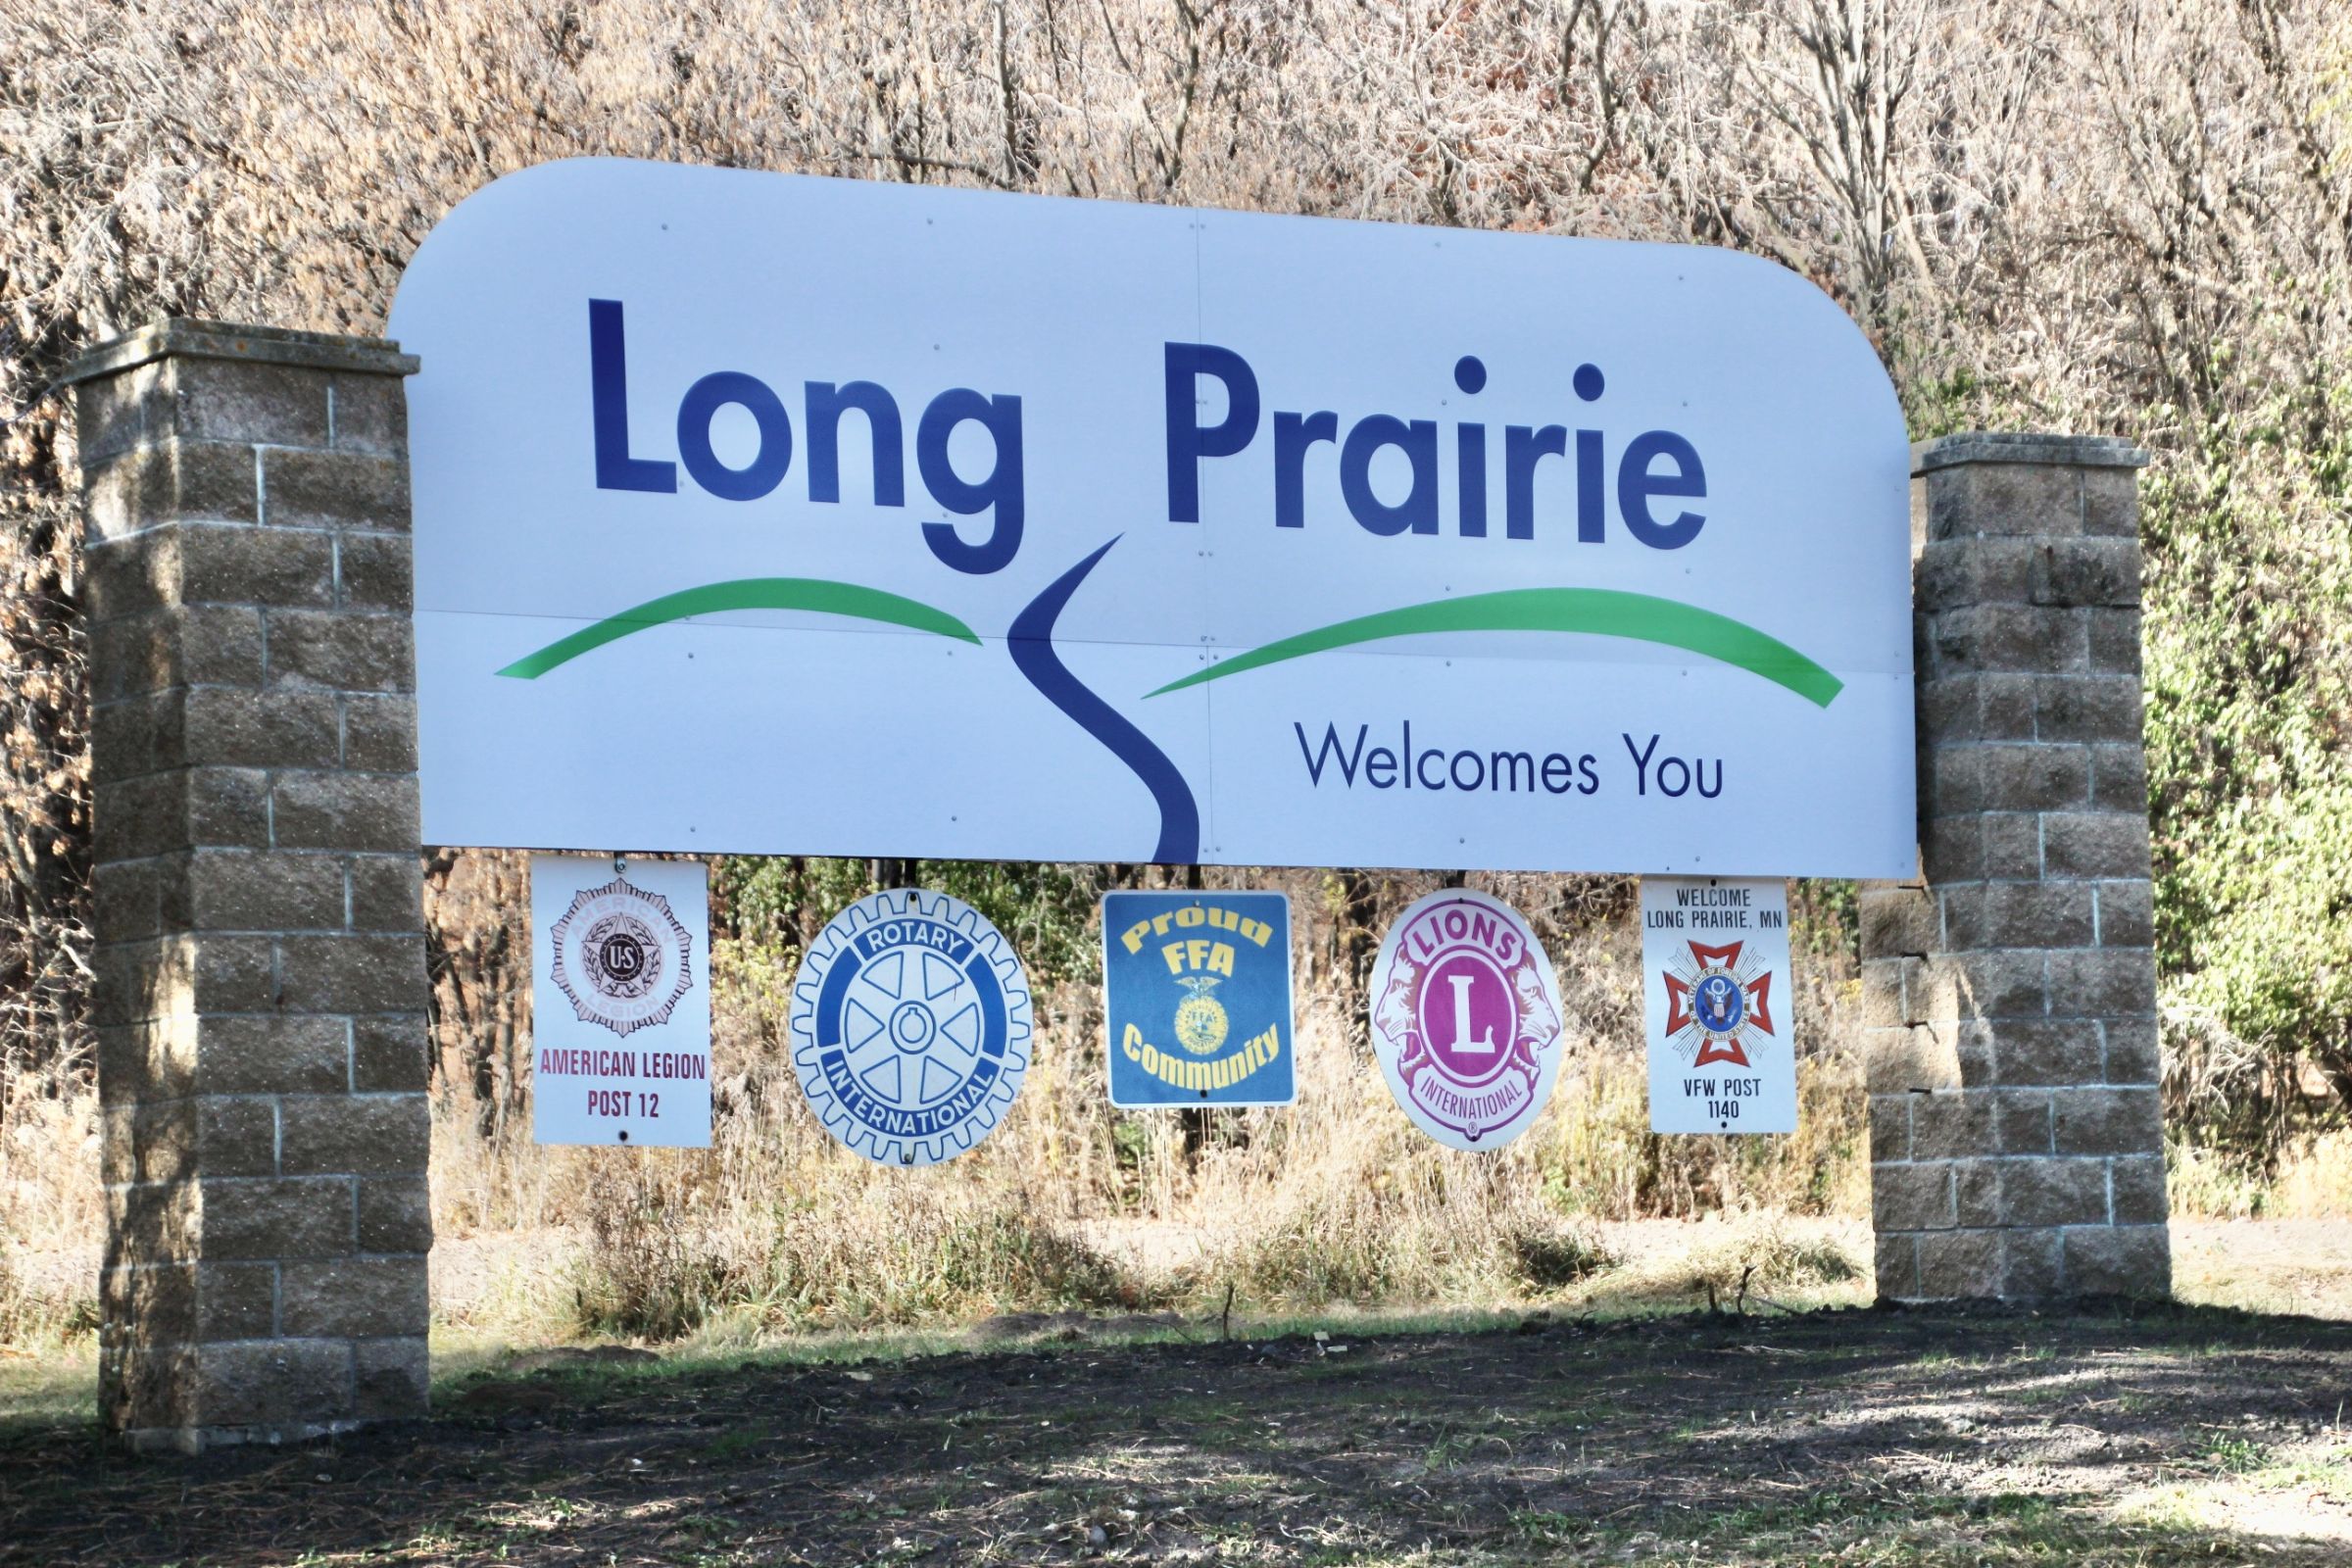 Click the Beautification Efforts To Transform the City of Long Prairie Slide Photo to Open